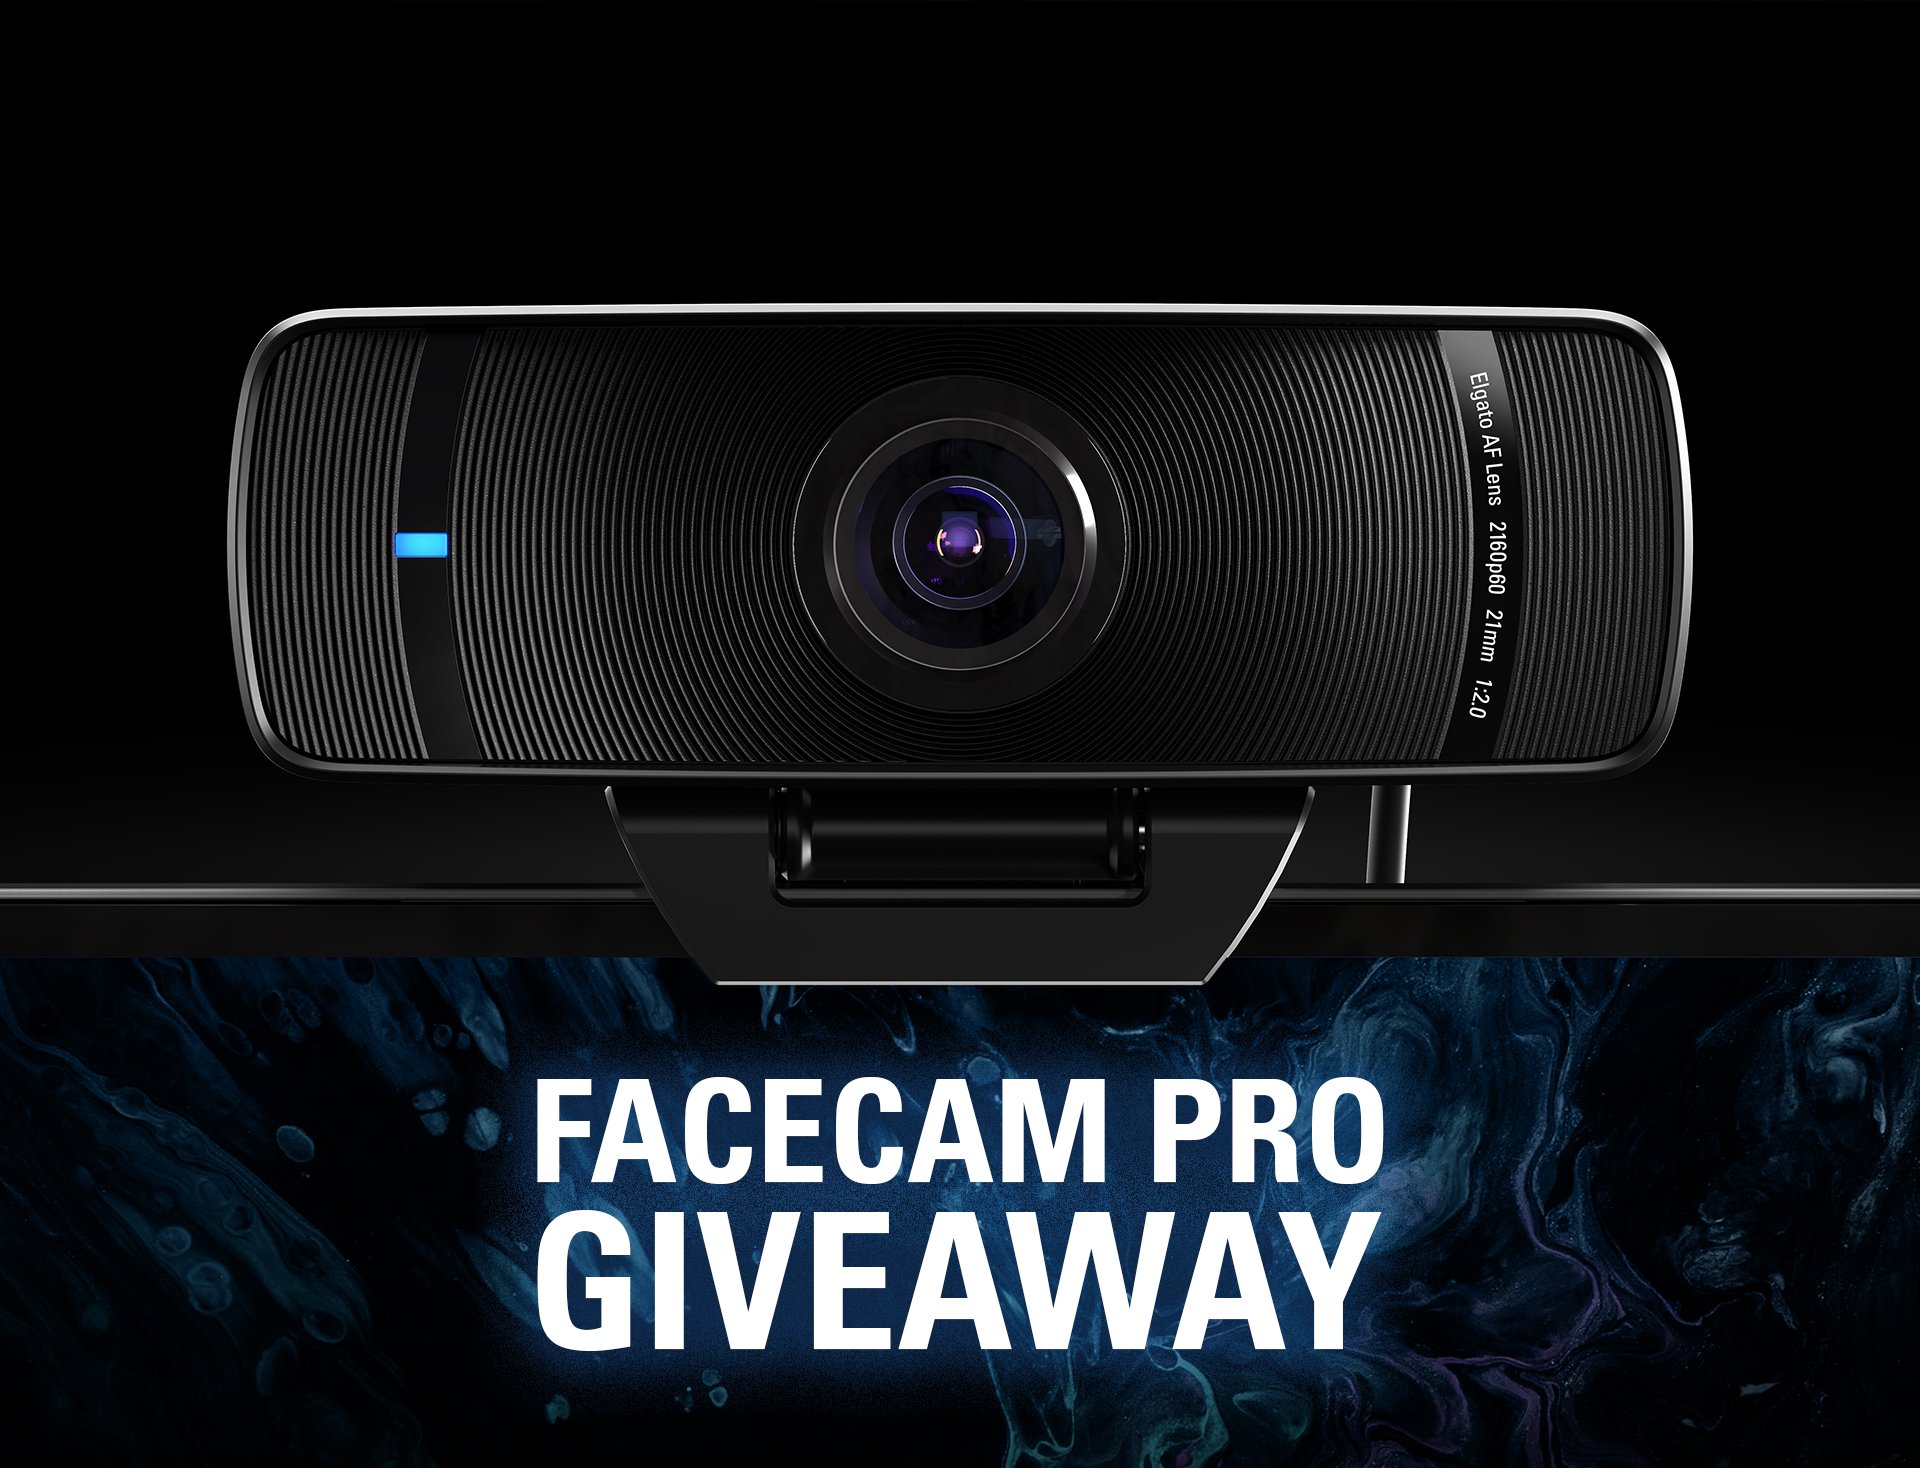 Elgato on X: 🎉 GIVEAWAY 🎉 We're giving away a Facecam Pro to